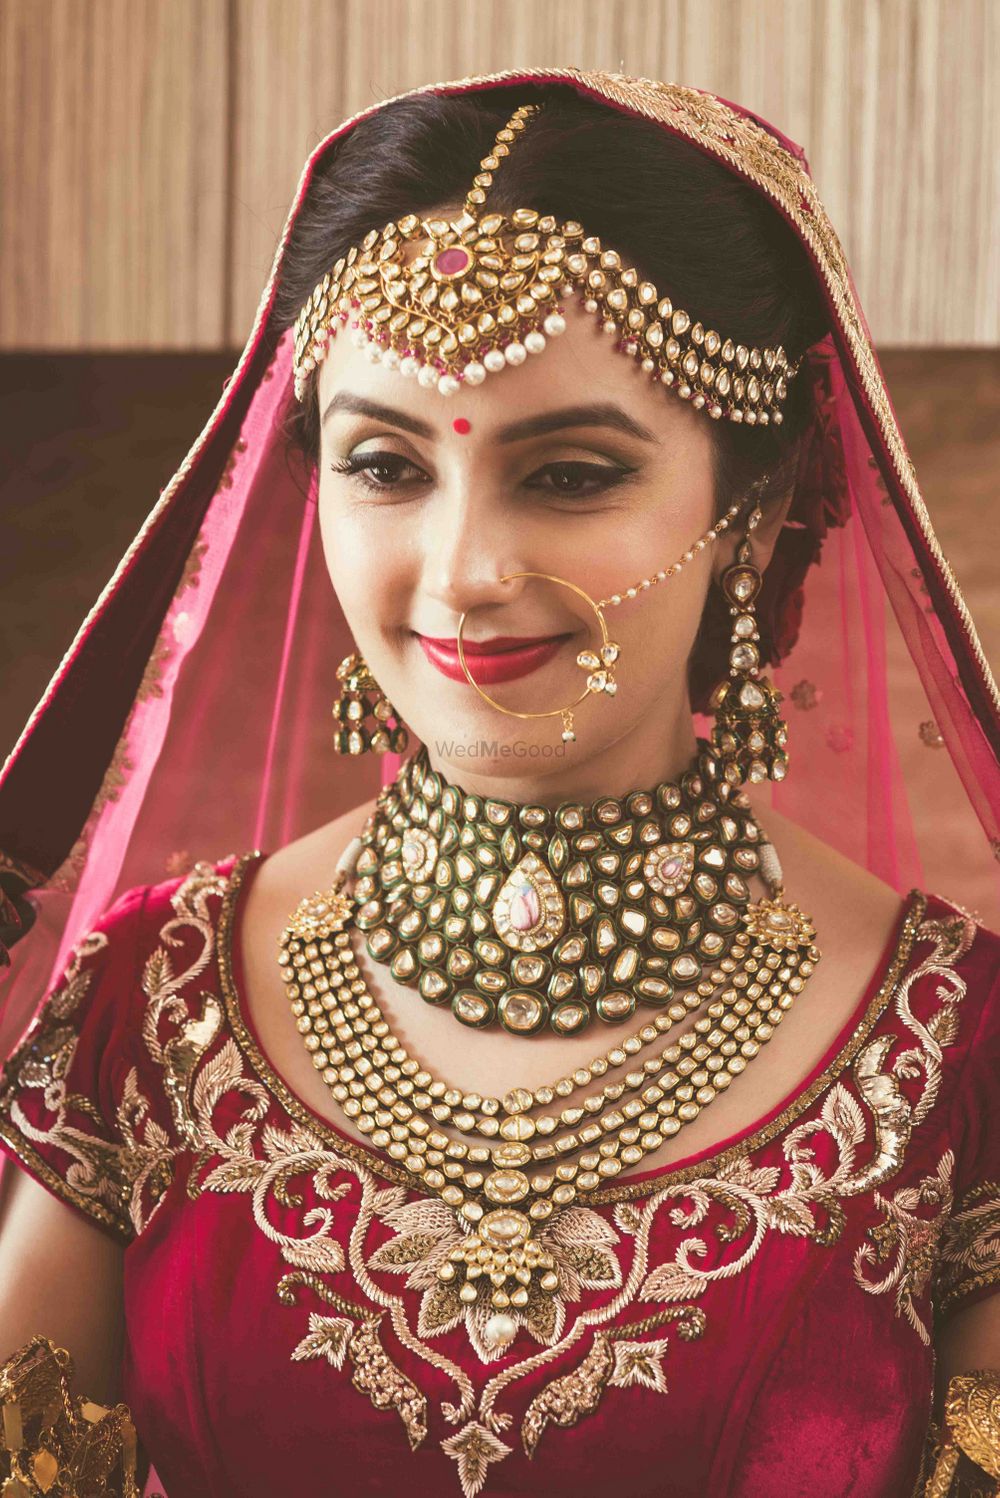 Photo of Royal Bride Portrait in Mathapatti and Polki Choker